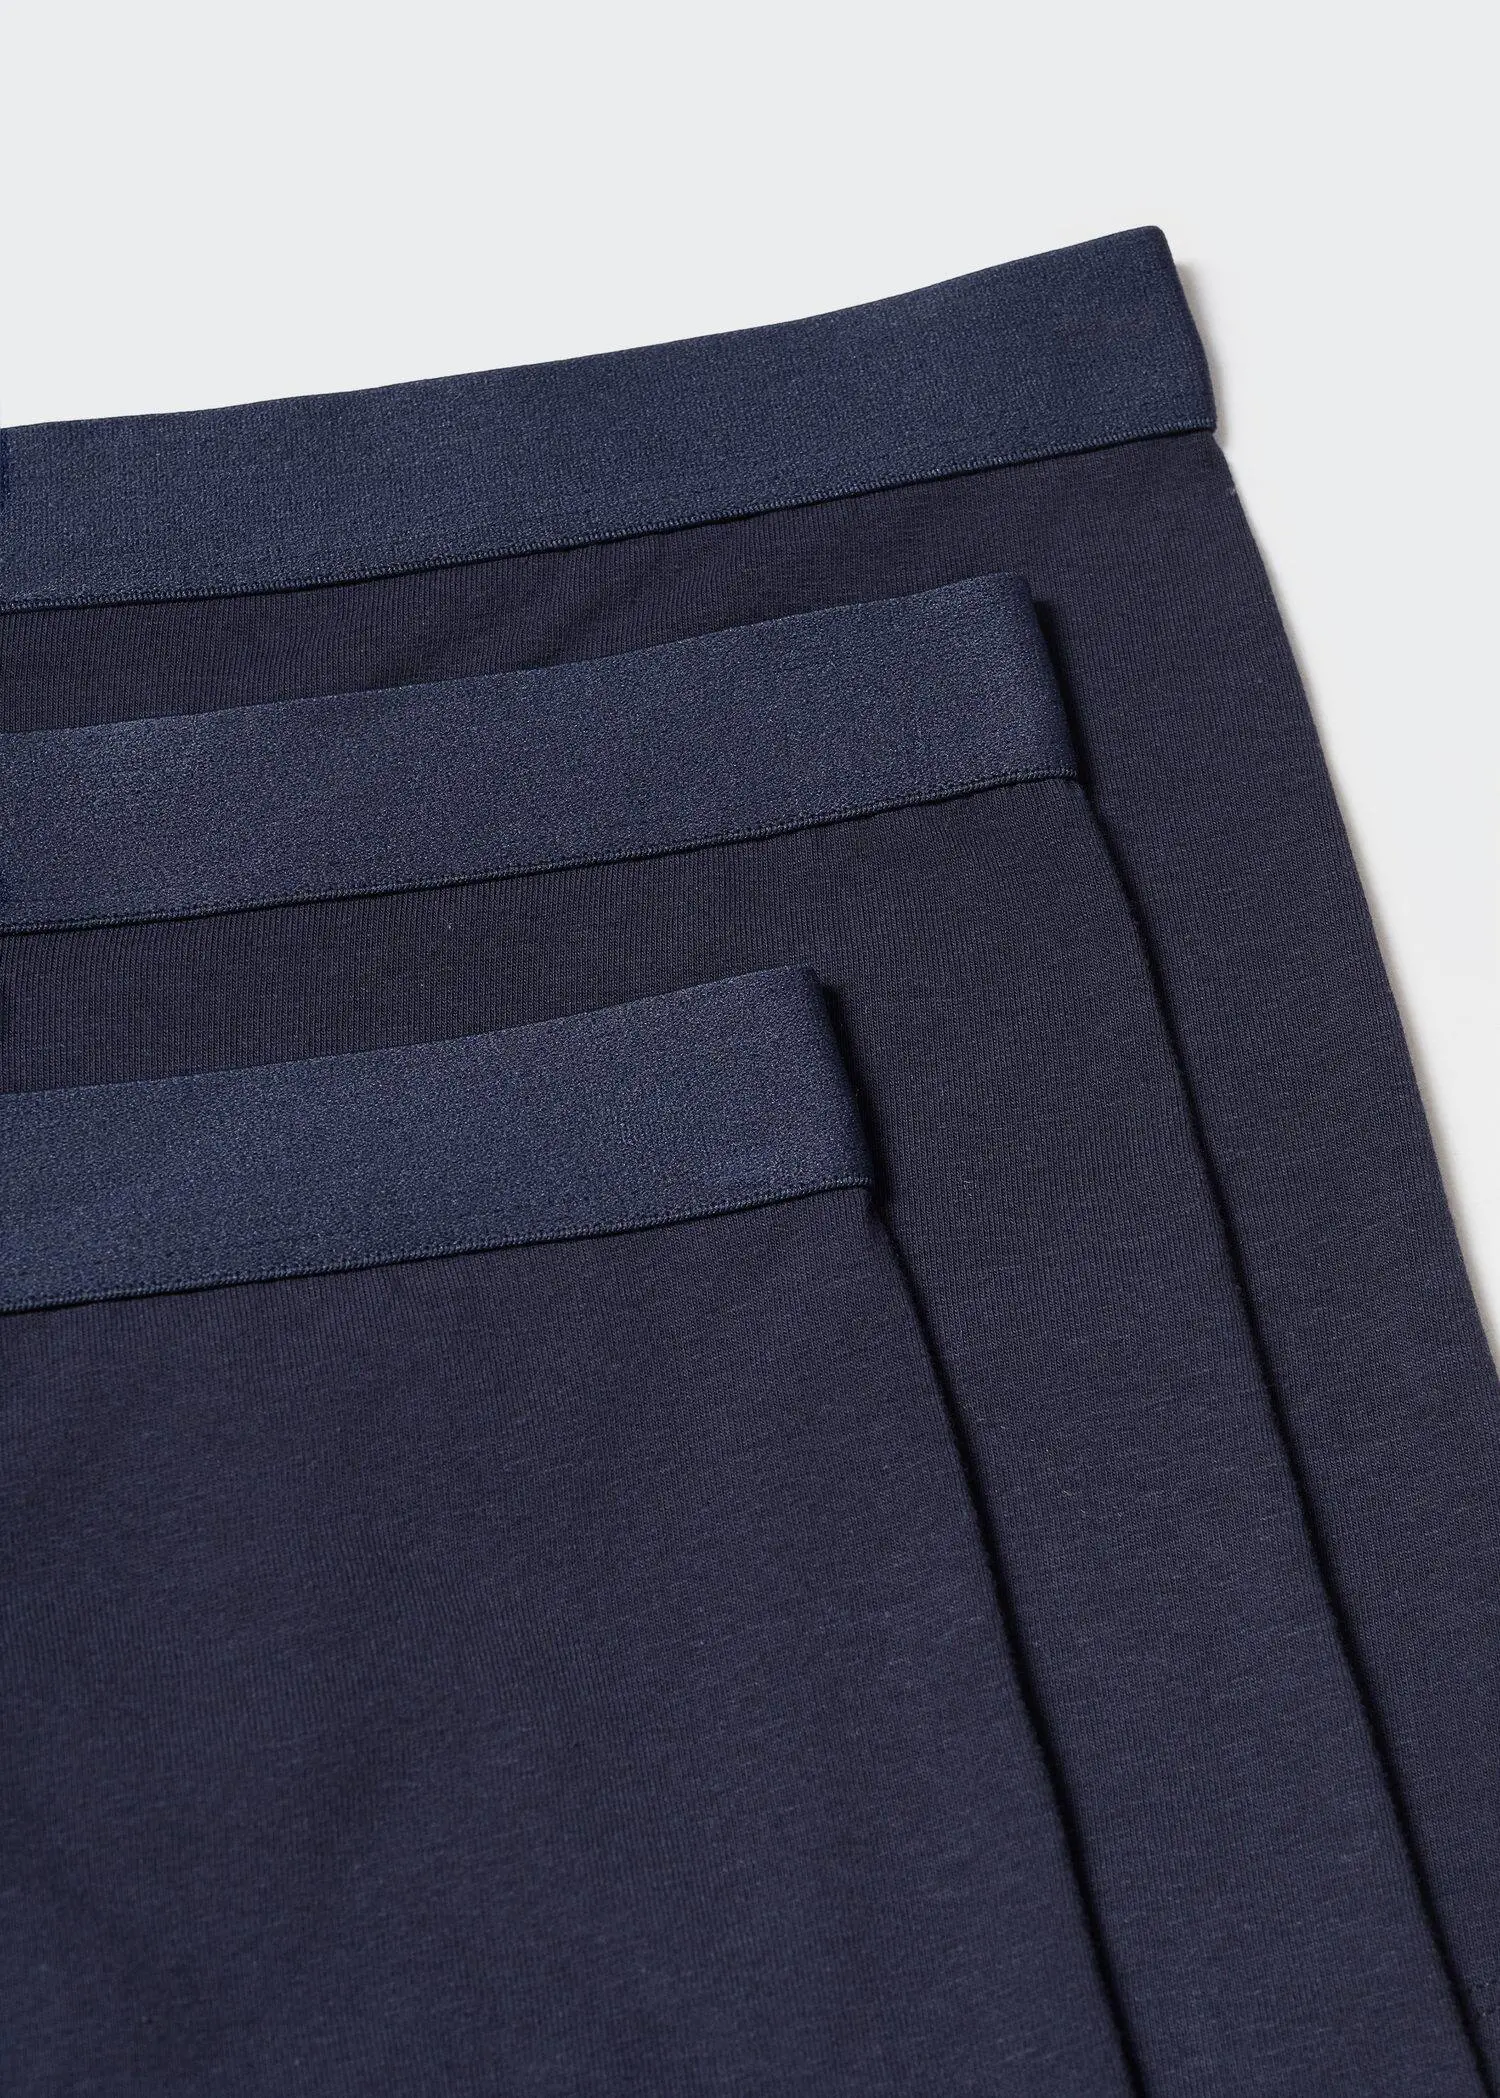 Mango 3-pack of blue cotton boxer shorts. a close up of a pair of pants 